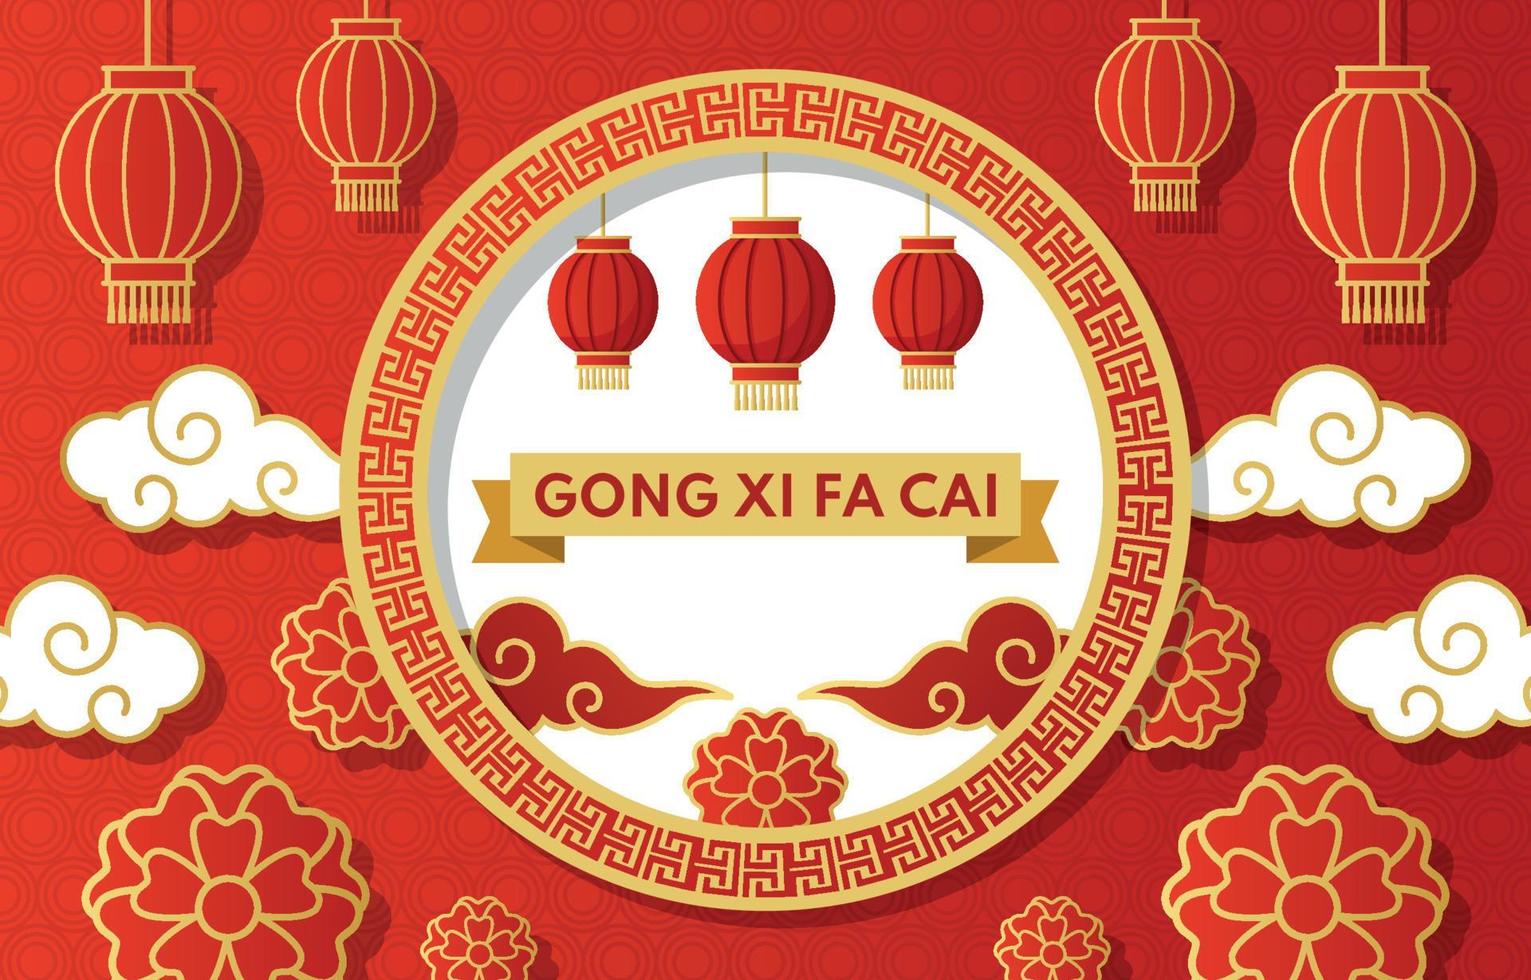 Gong Xi Fa Cai Greeting With Red Background and Lanterns vector